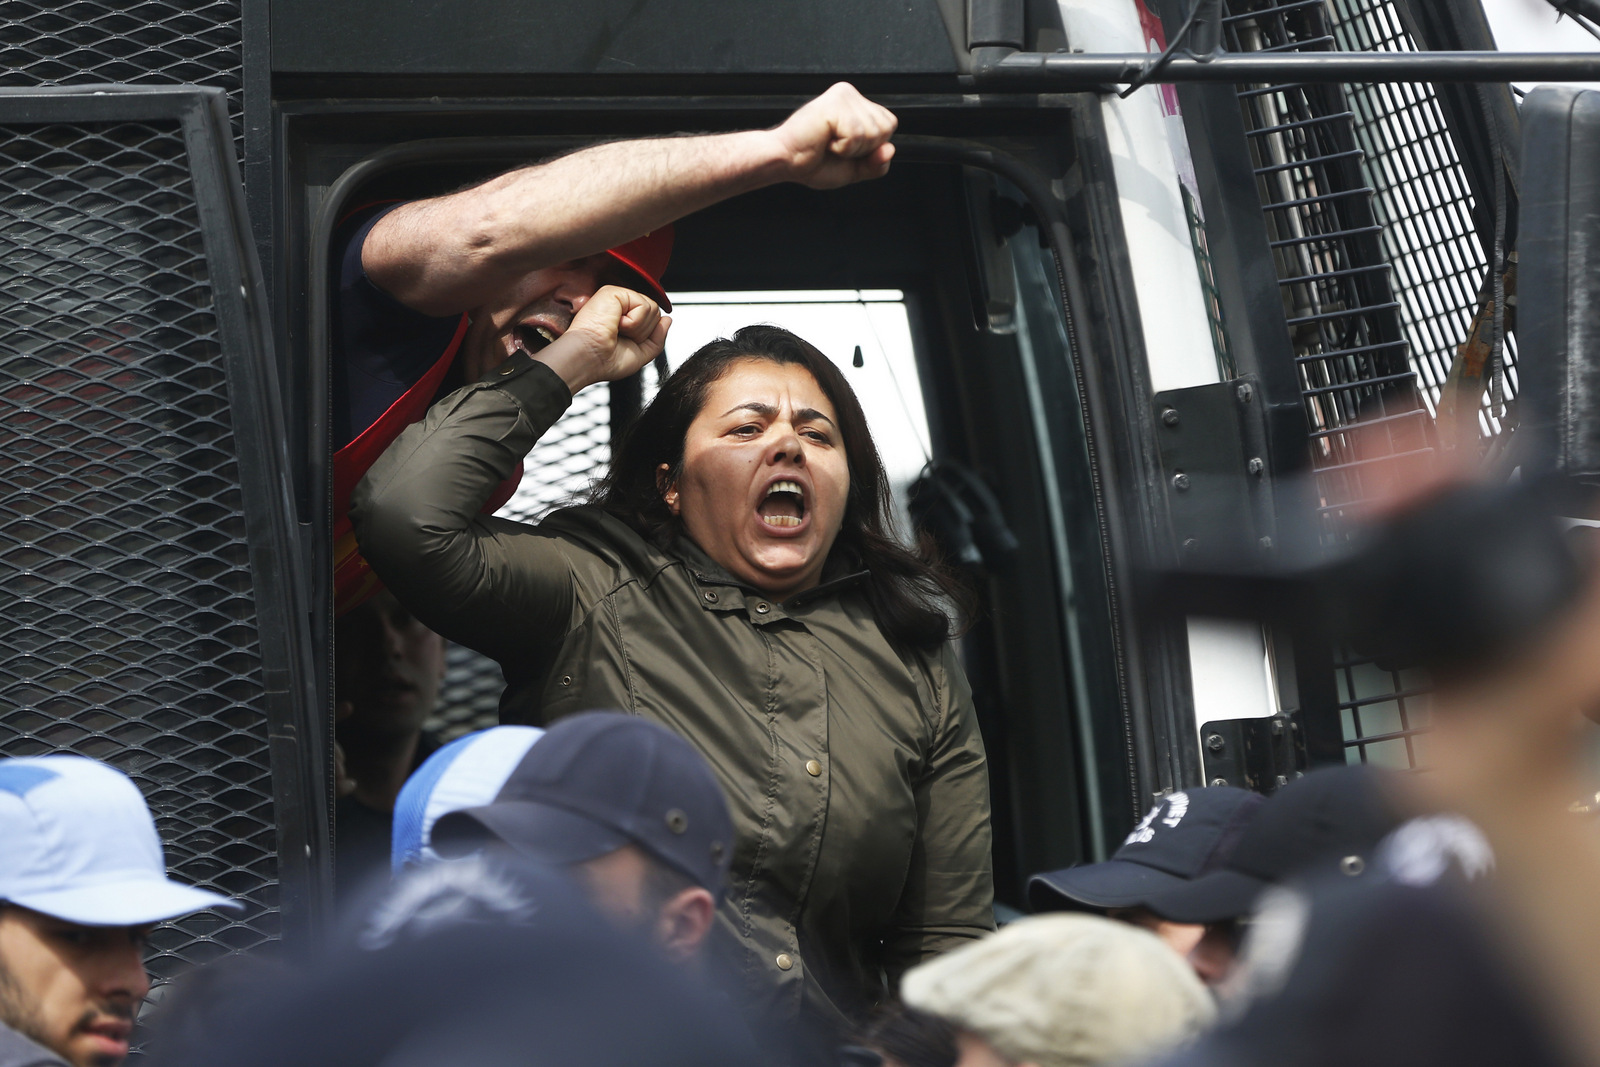 Detained protesters chant a slogan from inside a police in Istanbul, Monday, May 1, 2017. Police in Istanbul detained more than 70 people who tried to march to iconic Taksim Square in defiance of a ban on holding May Day events there. Workers and activists marked May Day with defiant rallies and marches for better pay and working conditions Monday.